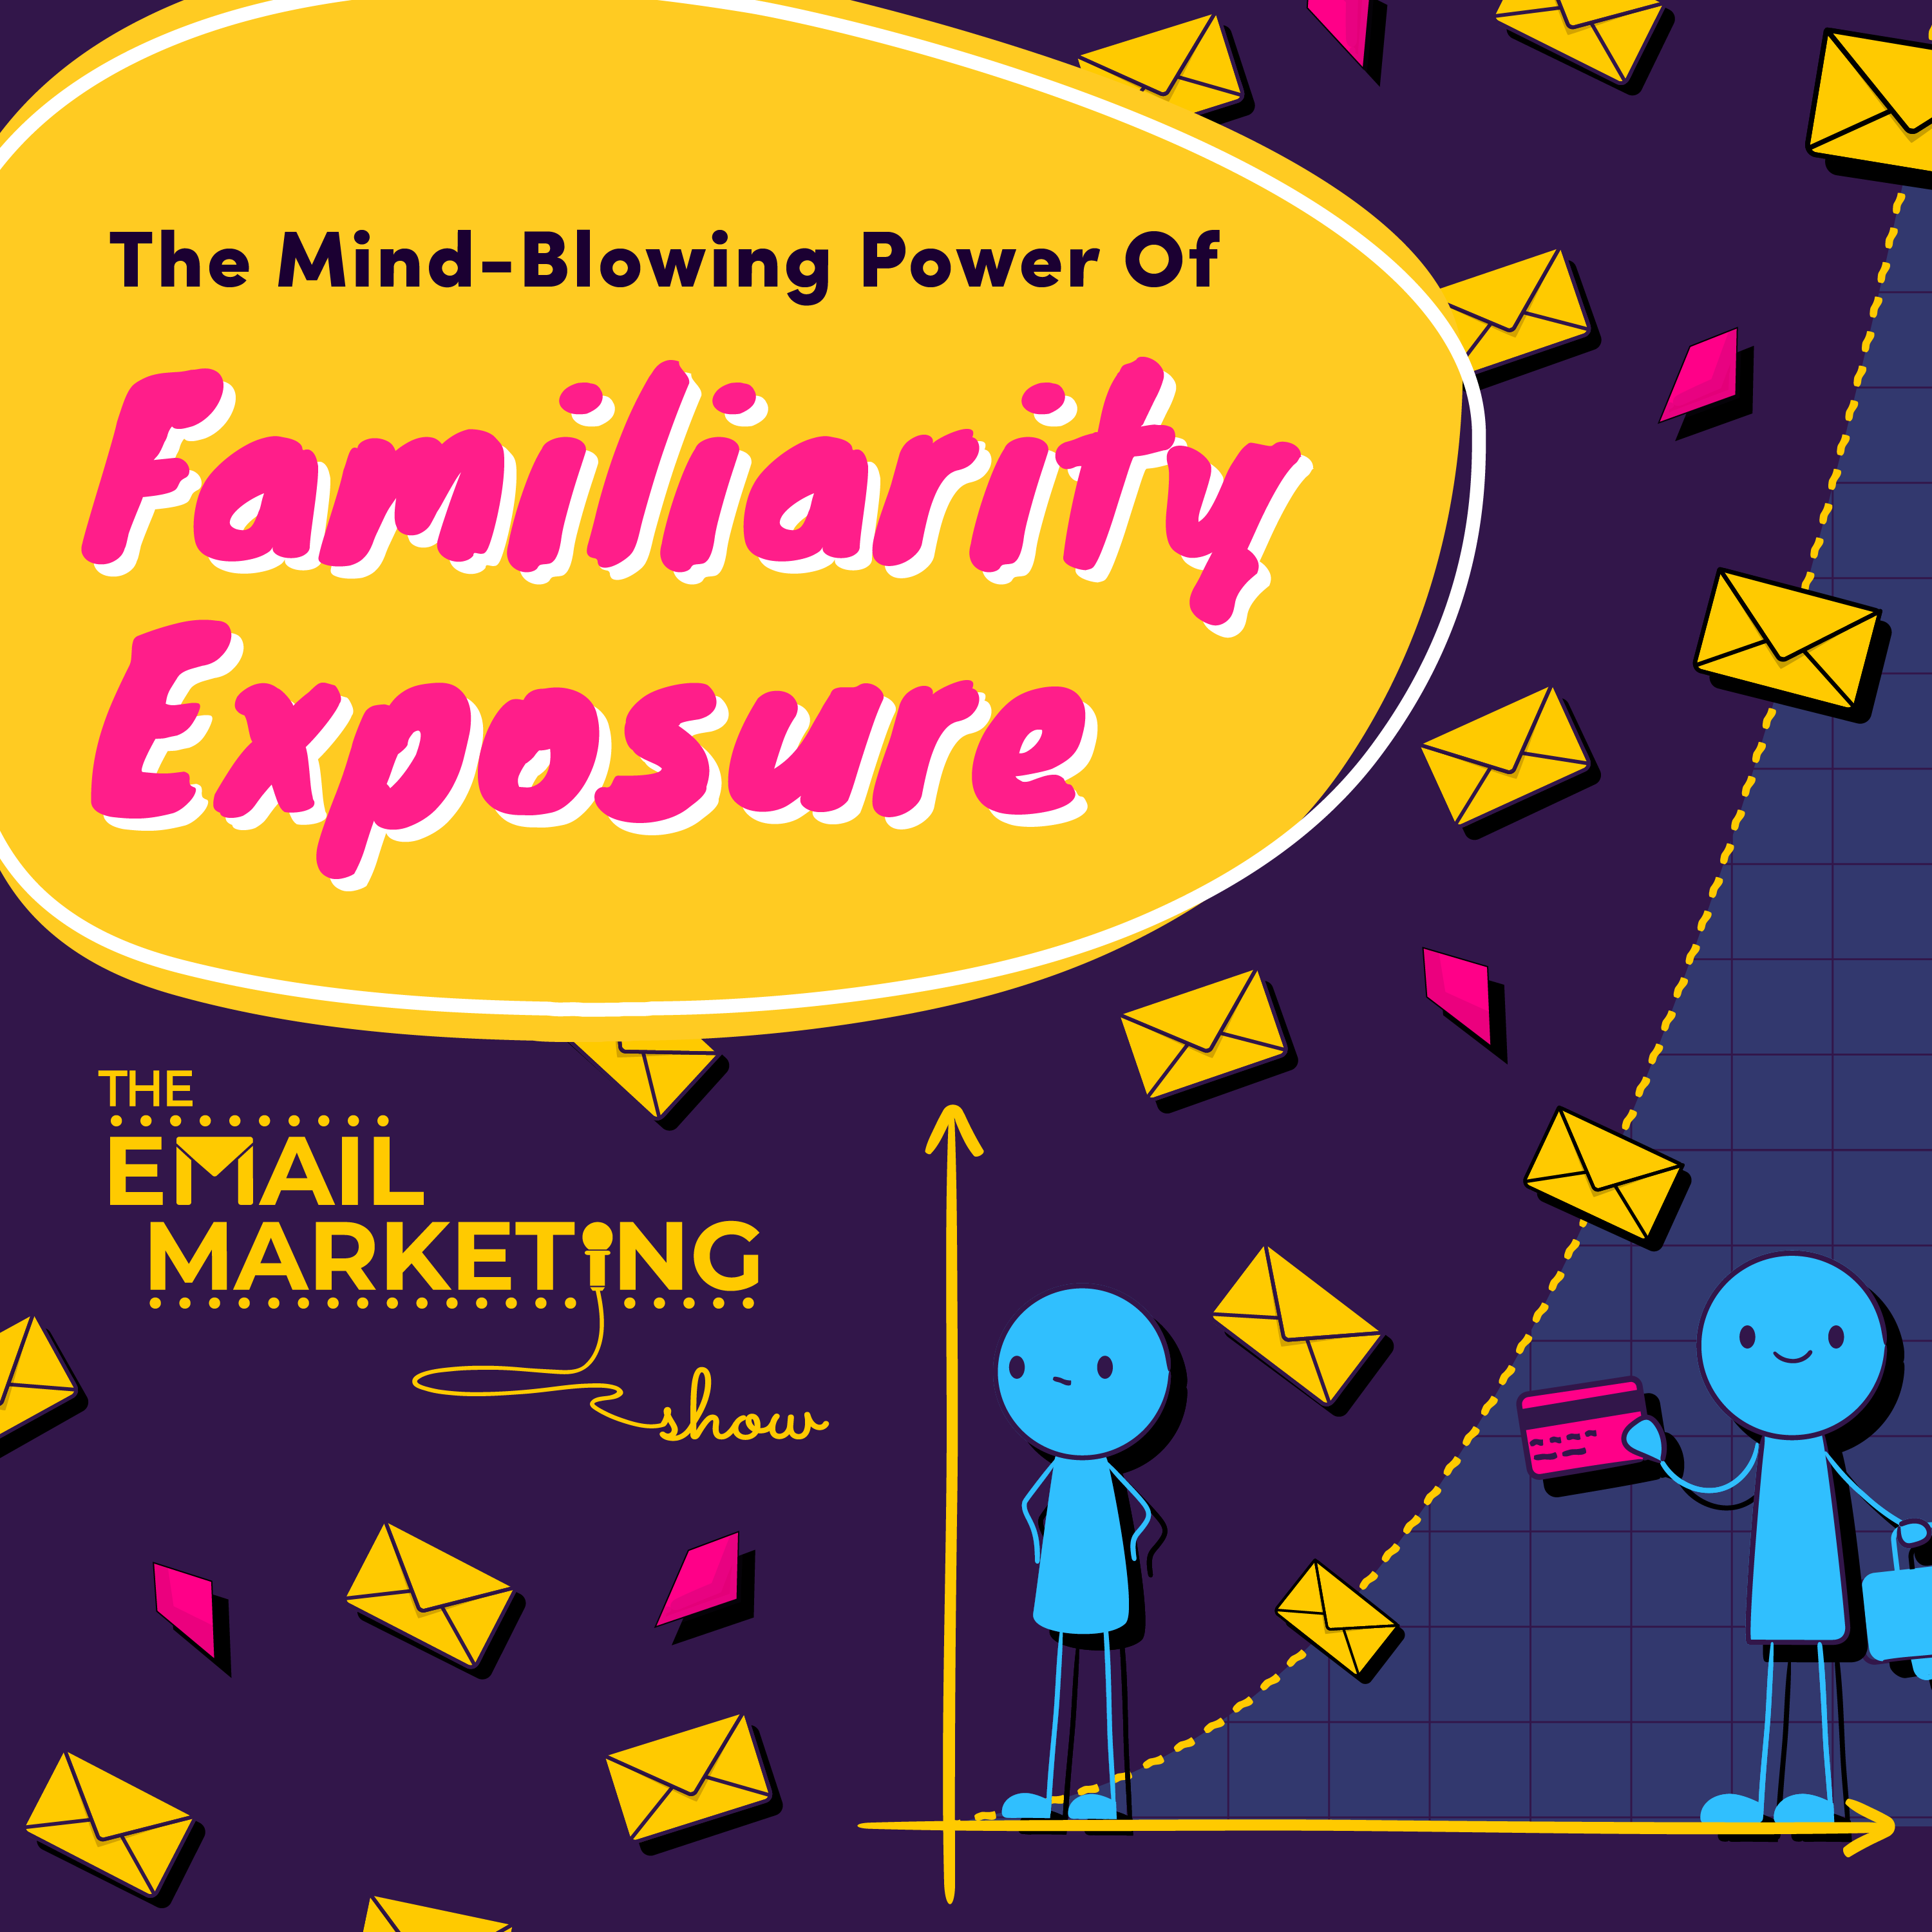 The Mind-Blowing Power Of Familiarity Exposure To Boost Sales